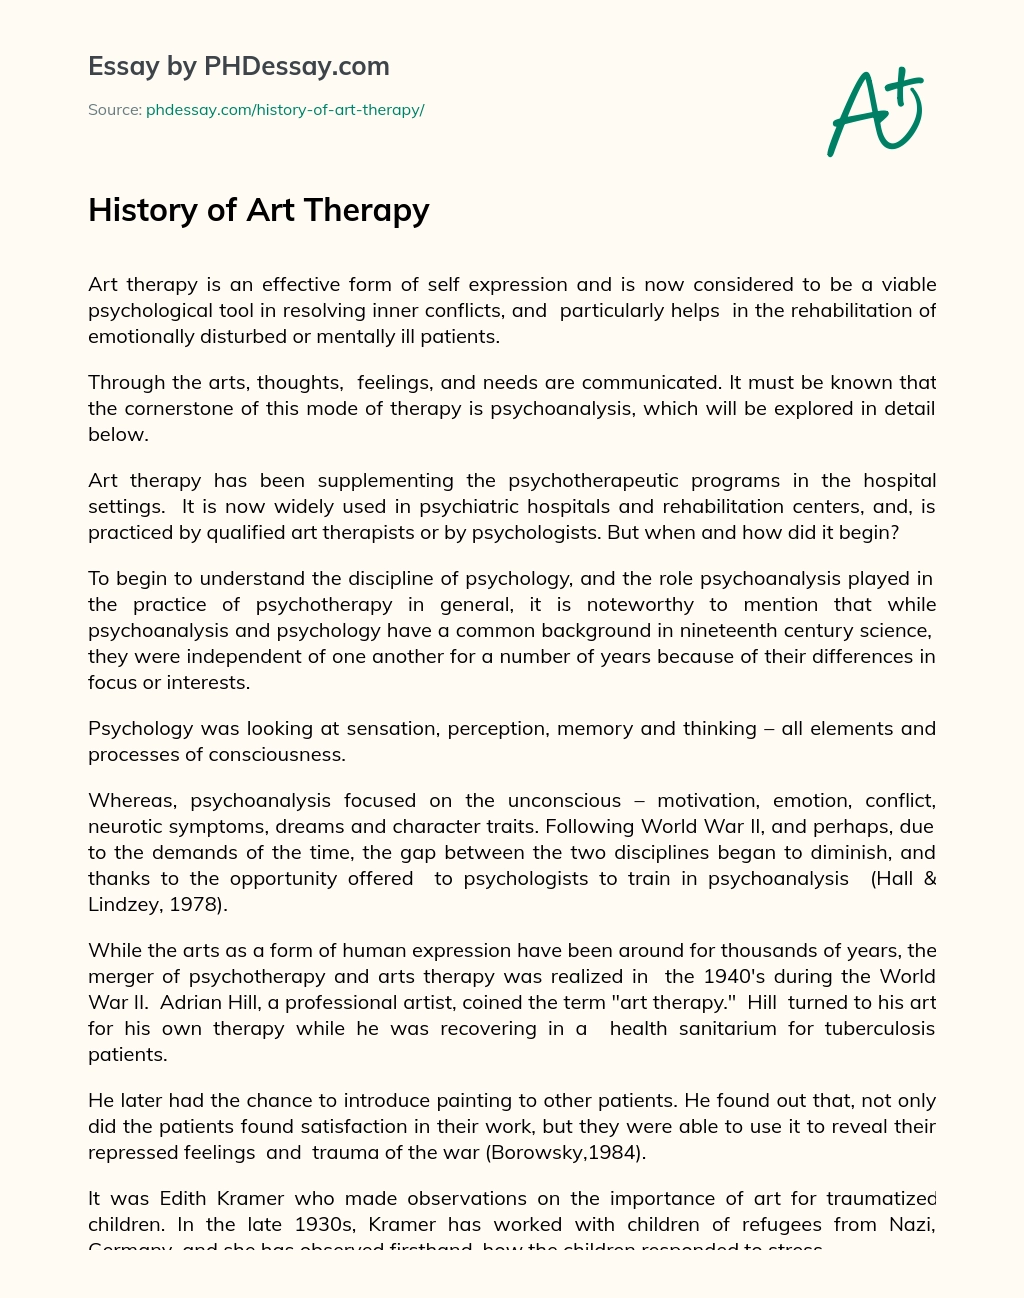 History of Art Therapy essay